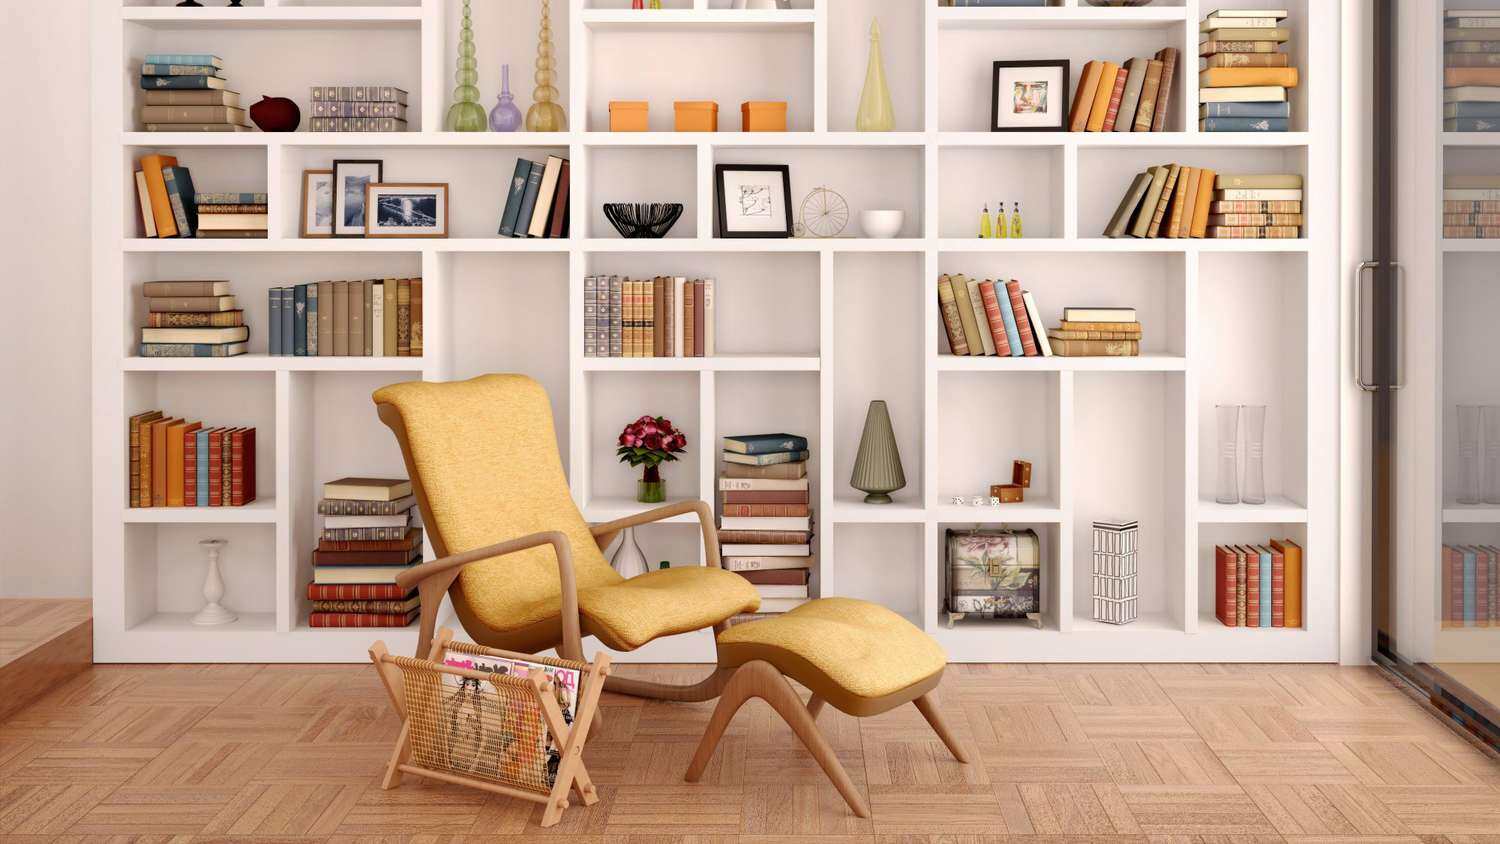 Say Goodbye to Clutter: How to Keep Your Home Clean and Organized